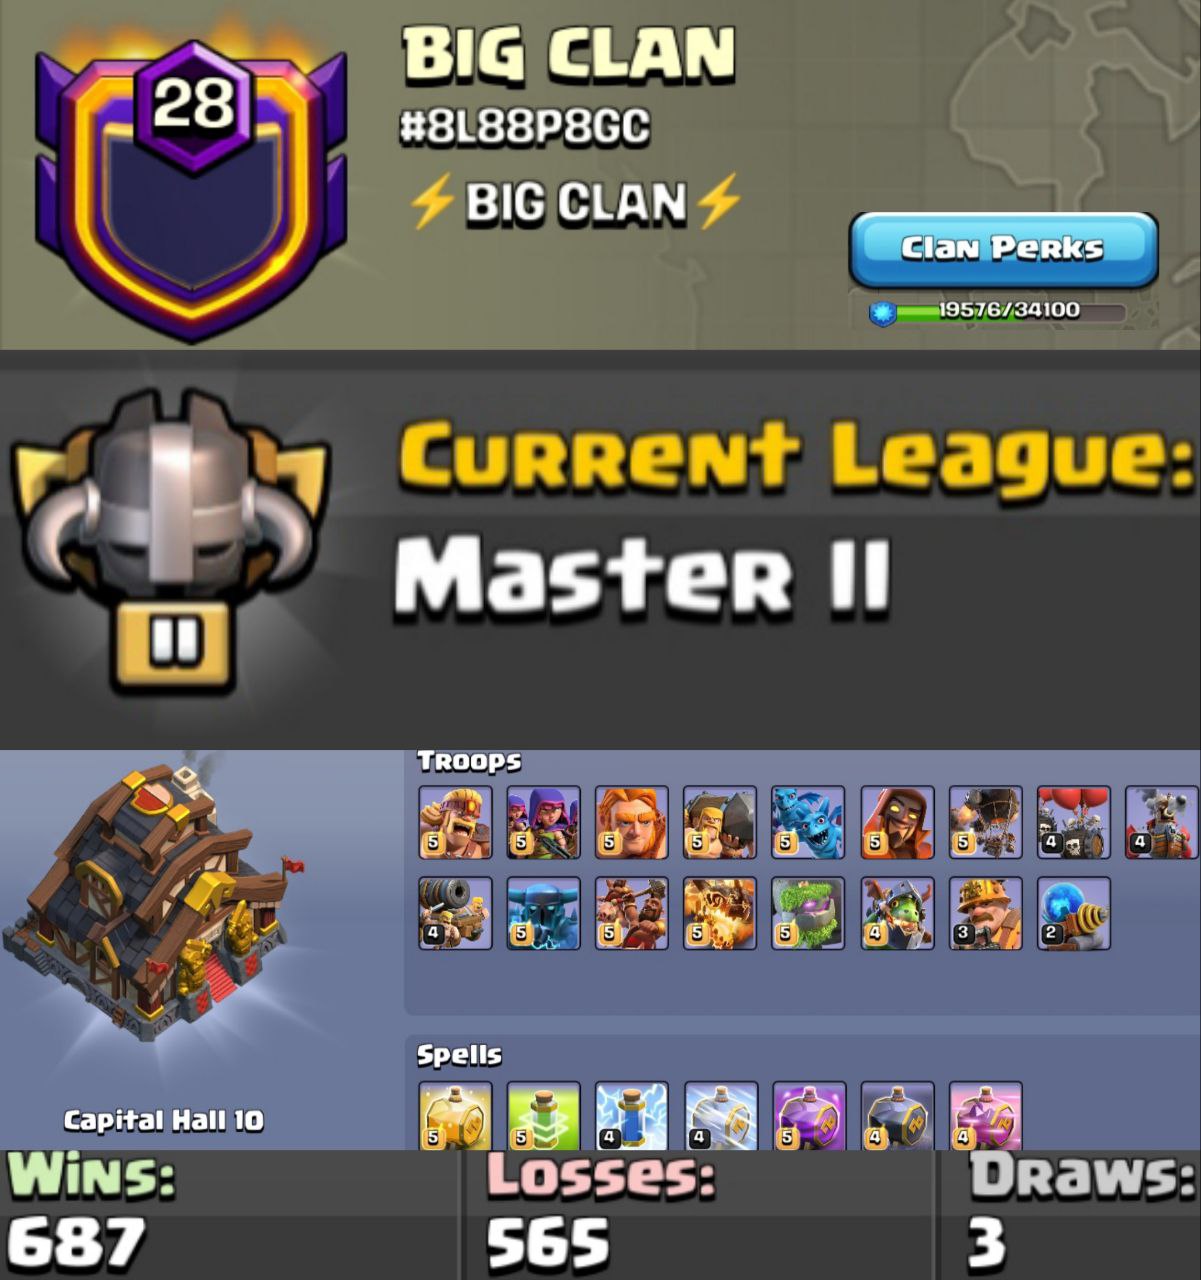 LEVEL - 28 | NAME - BIG CLAN l LEAGUE - MASTER 2 | CC - 10 | WAR LOG - 687 : 565 | AMAZING NAME & LOG | INSTANT DELIVERY